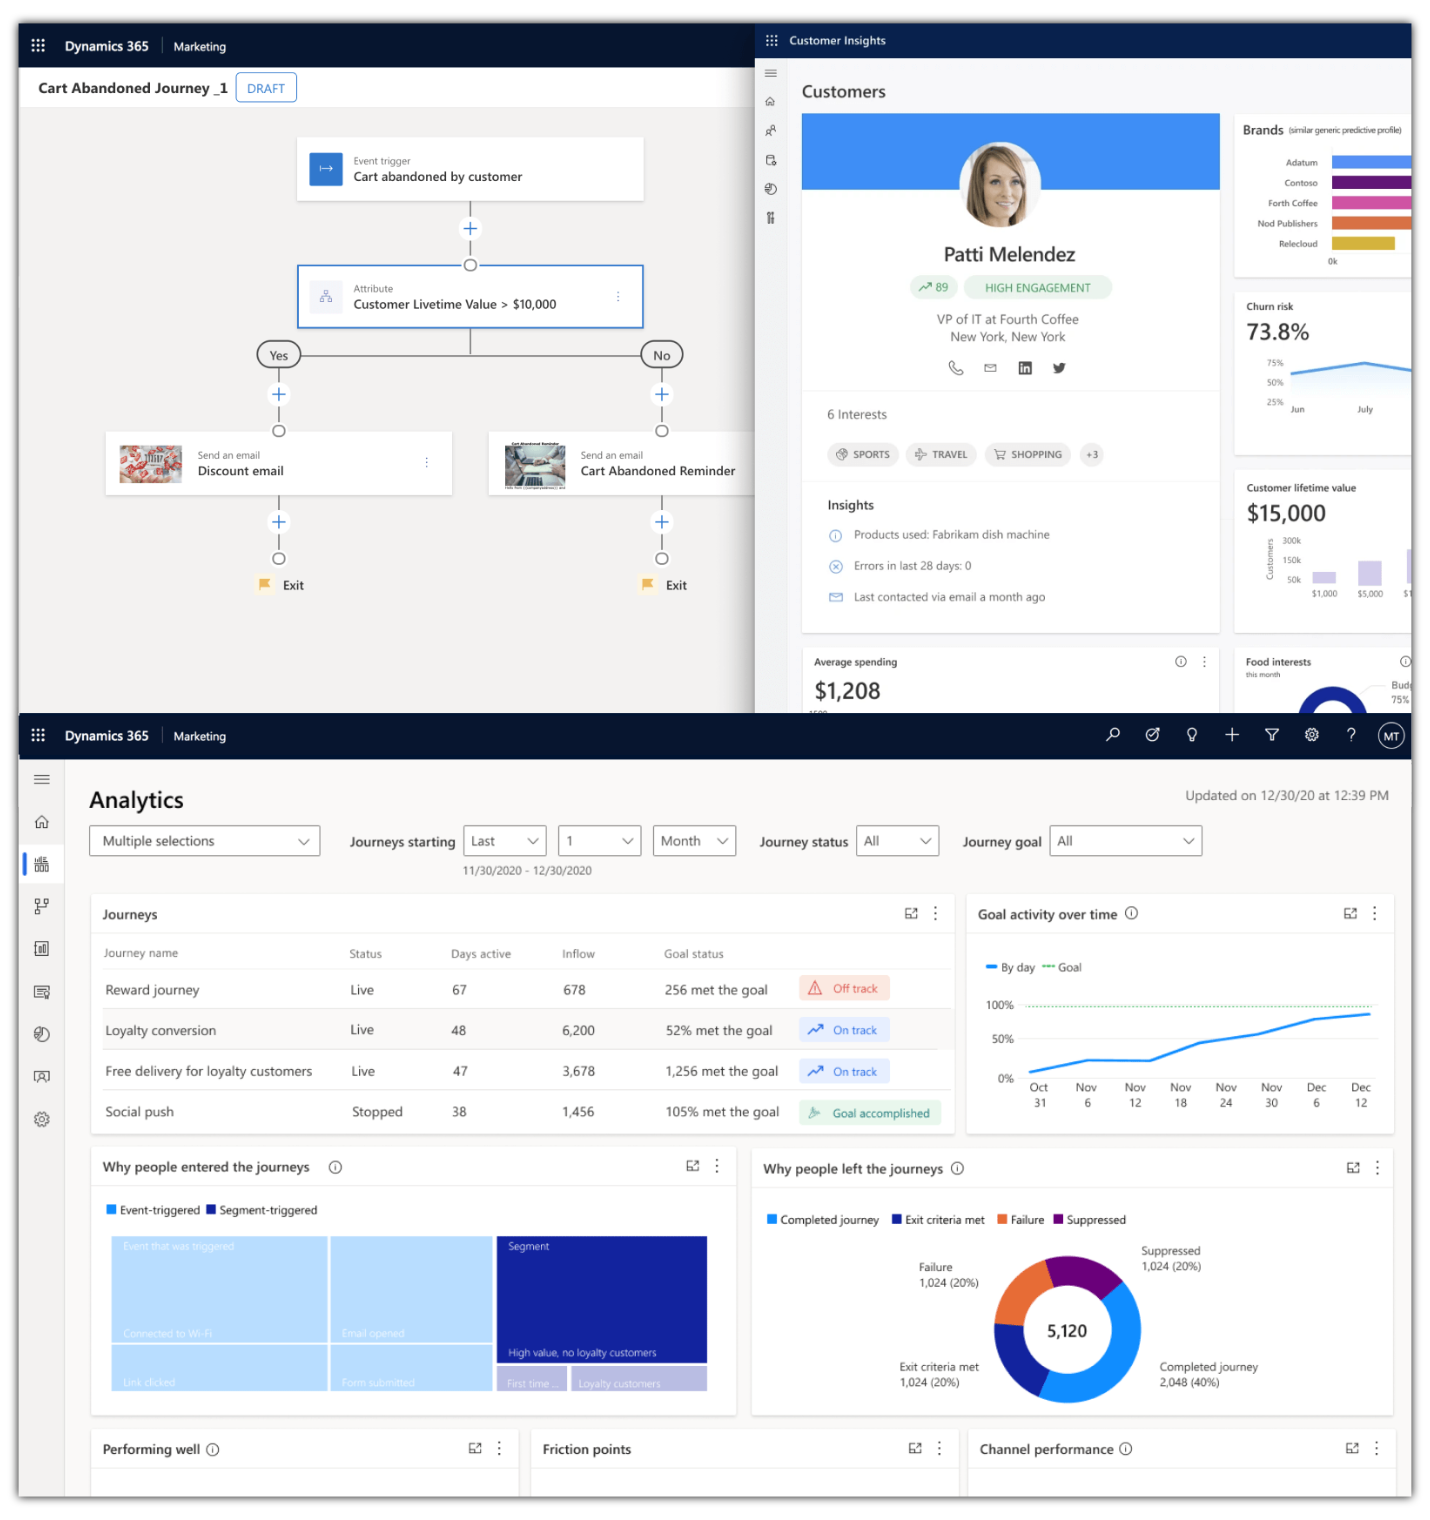 Personalize Customer Experiences With AI with Dynamics 365 Marketing